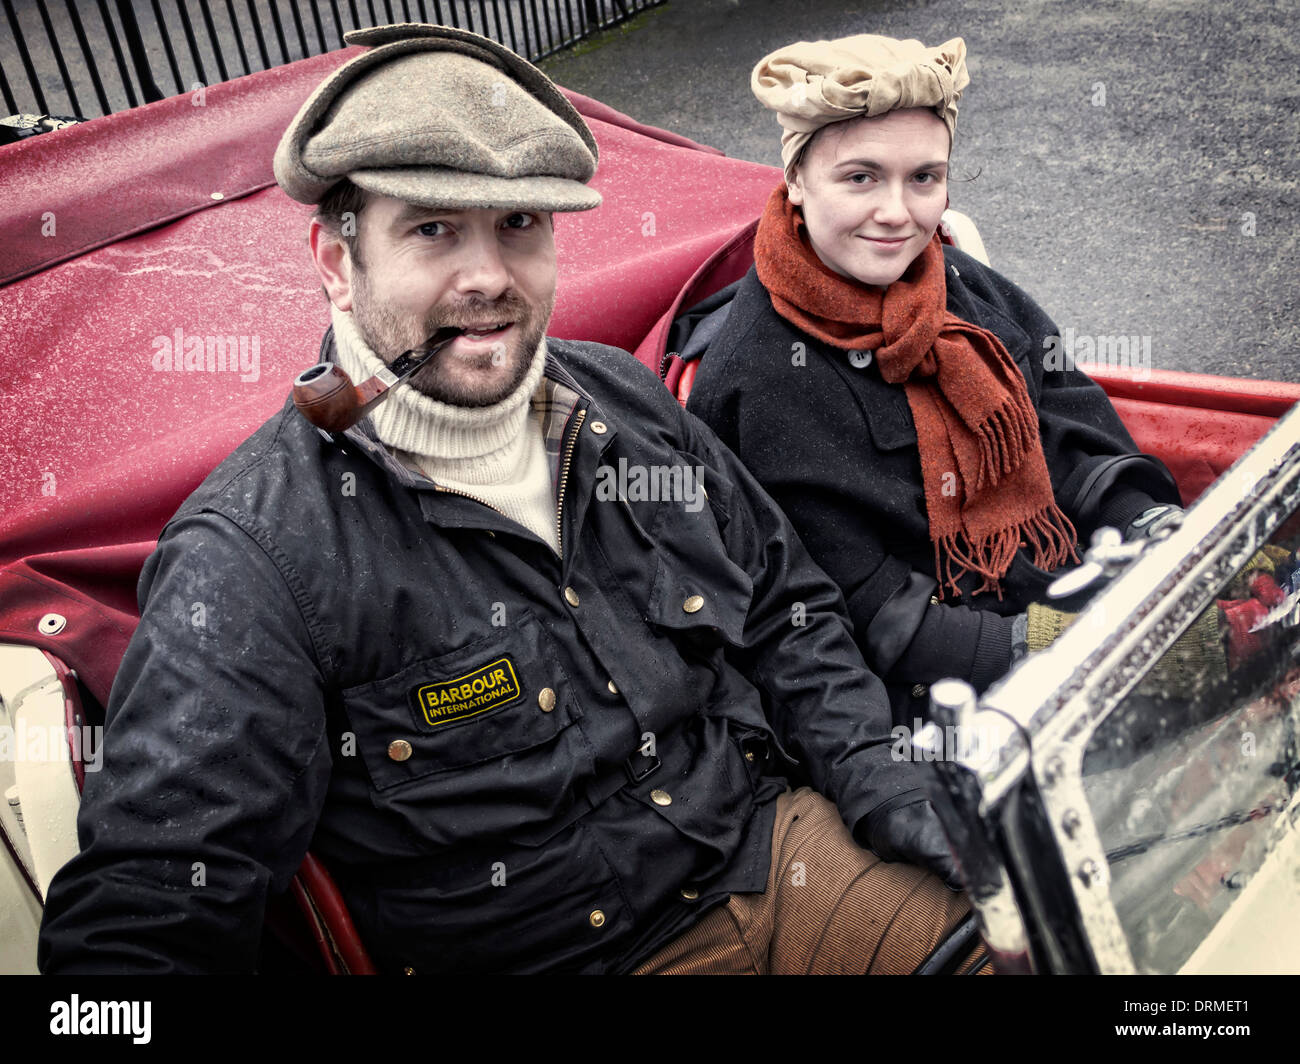 New Years Day gathering 2014 Brooklands Museum. Crew of 1934 Triumph tourer. Stock Photo